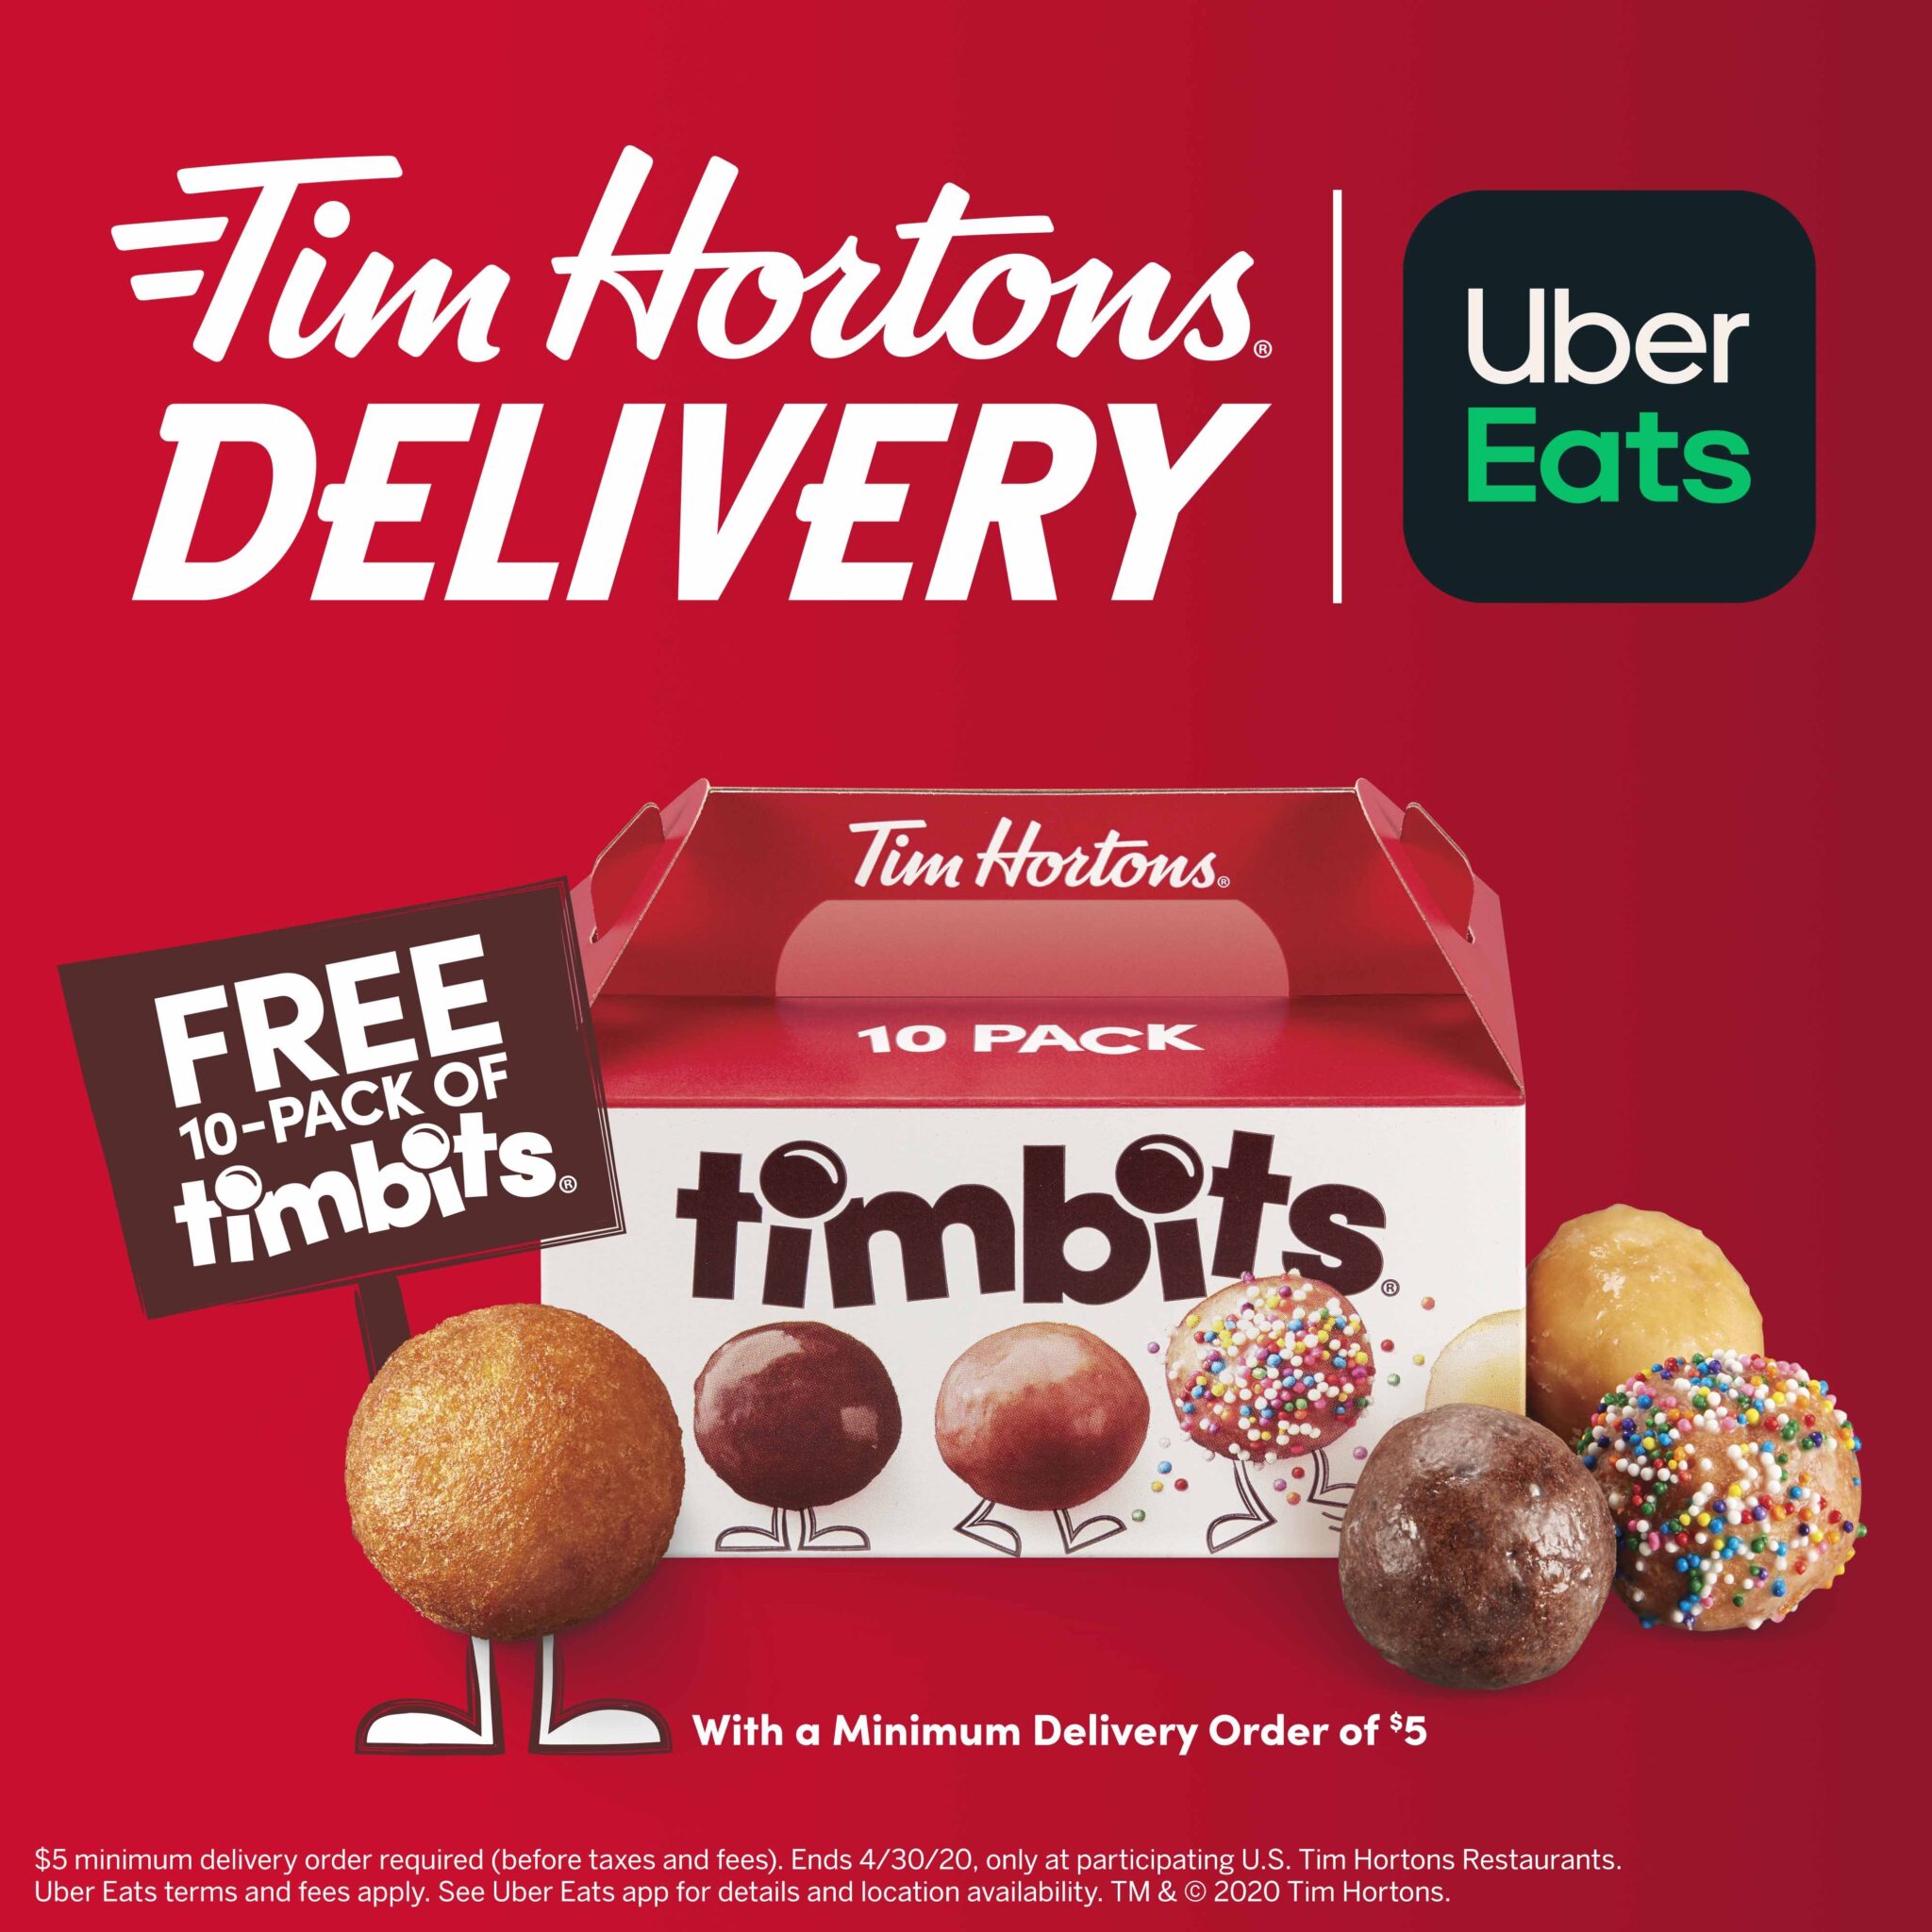 Tim Hortons US partners with Uber Eats for firstever delivery option